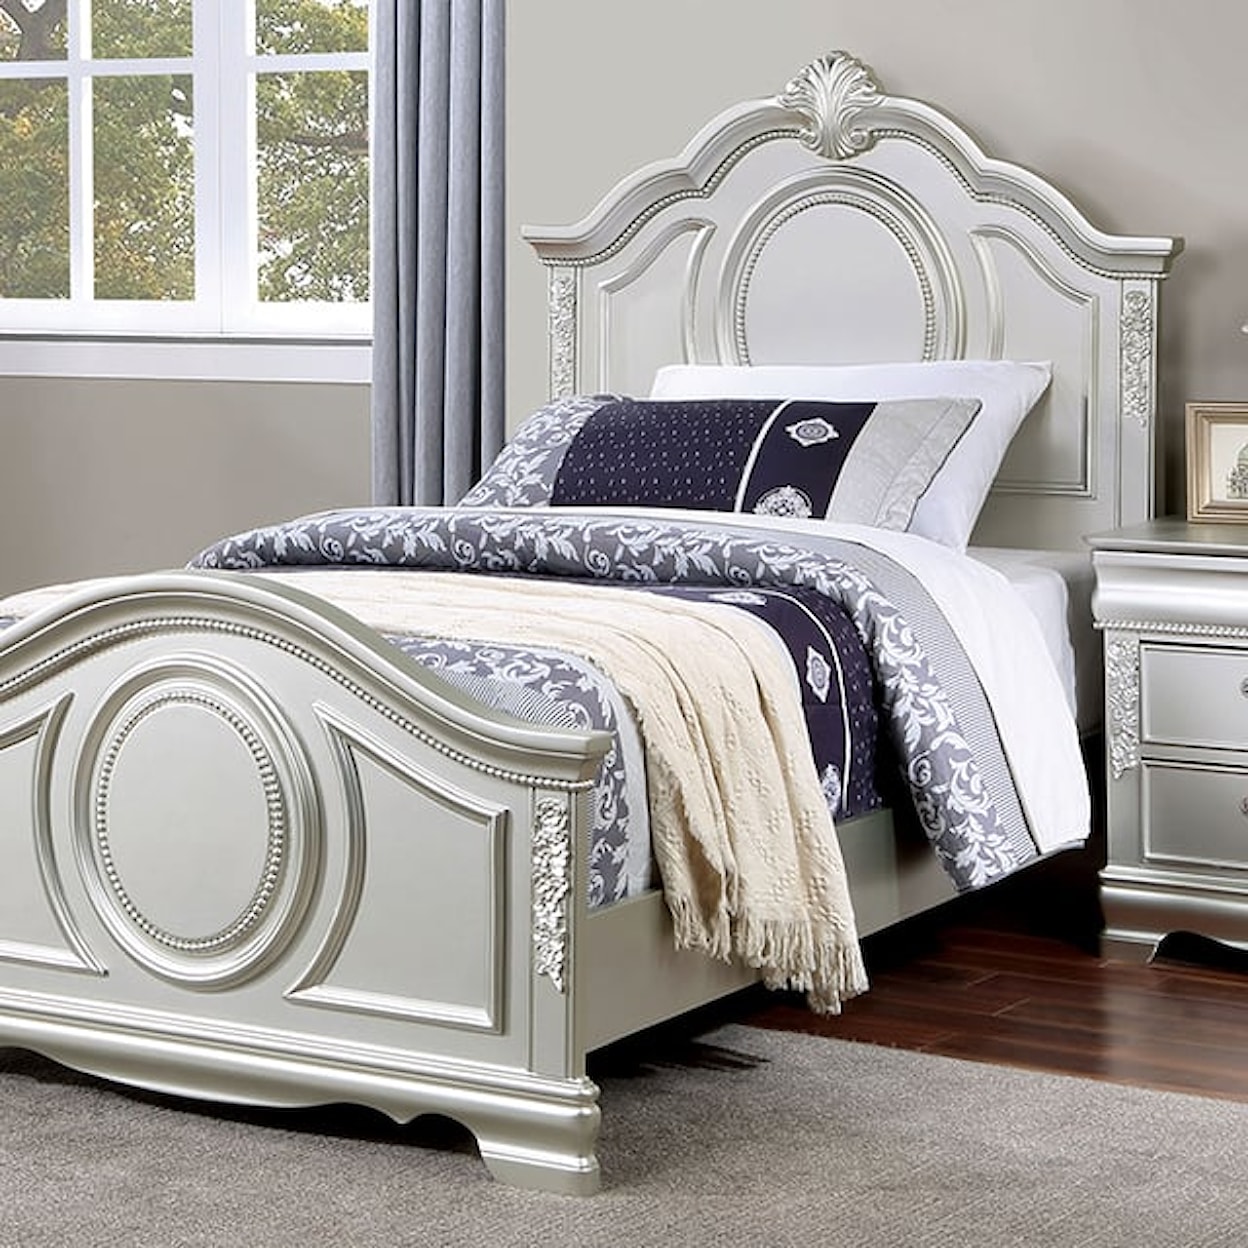 Furniture of America Alecia Twin Bed with Wood Carved Details